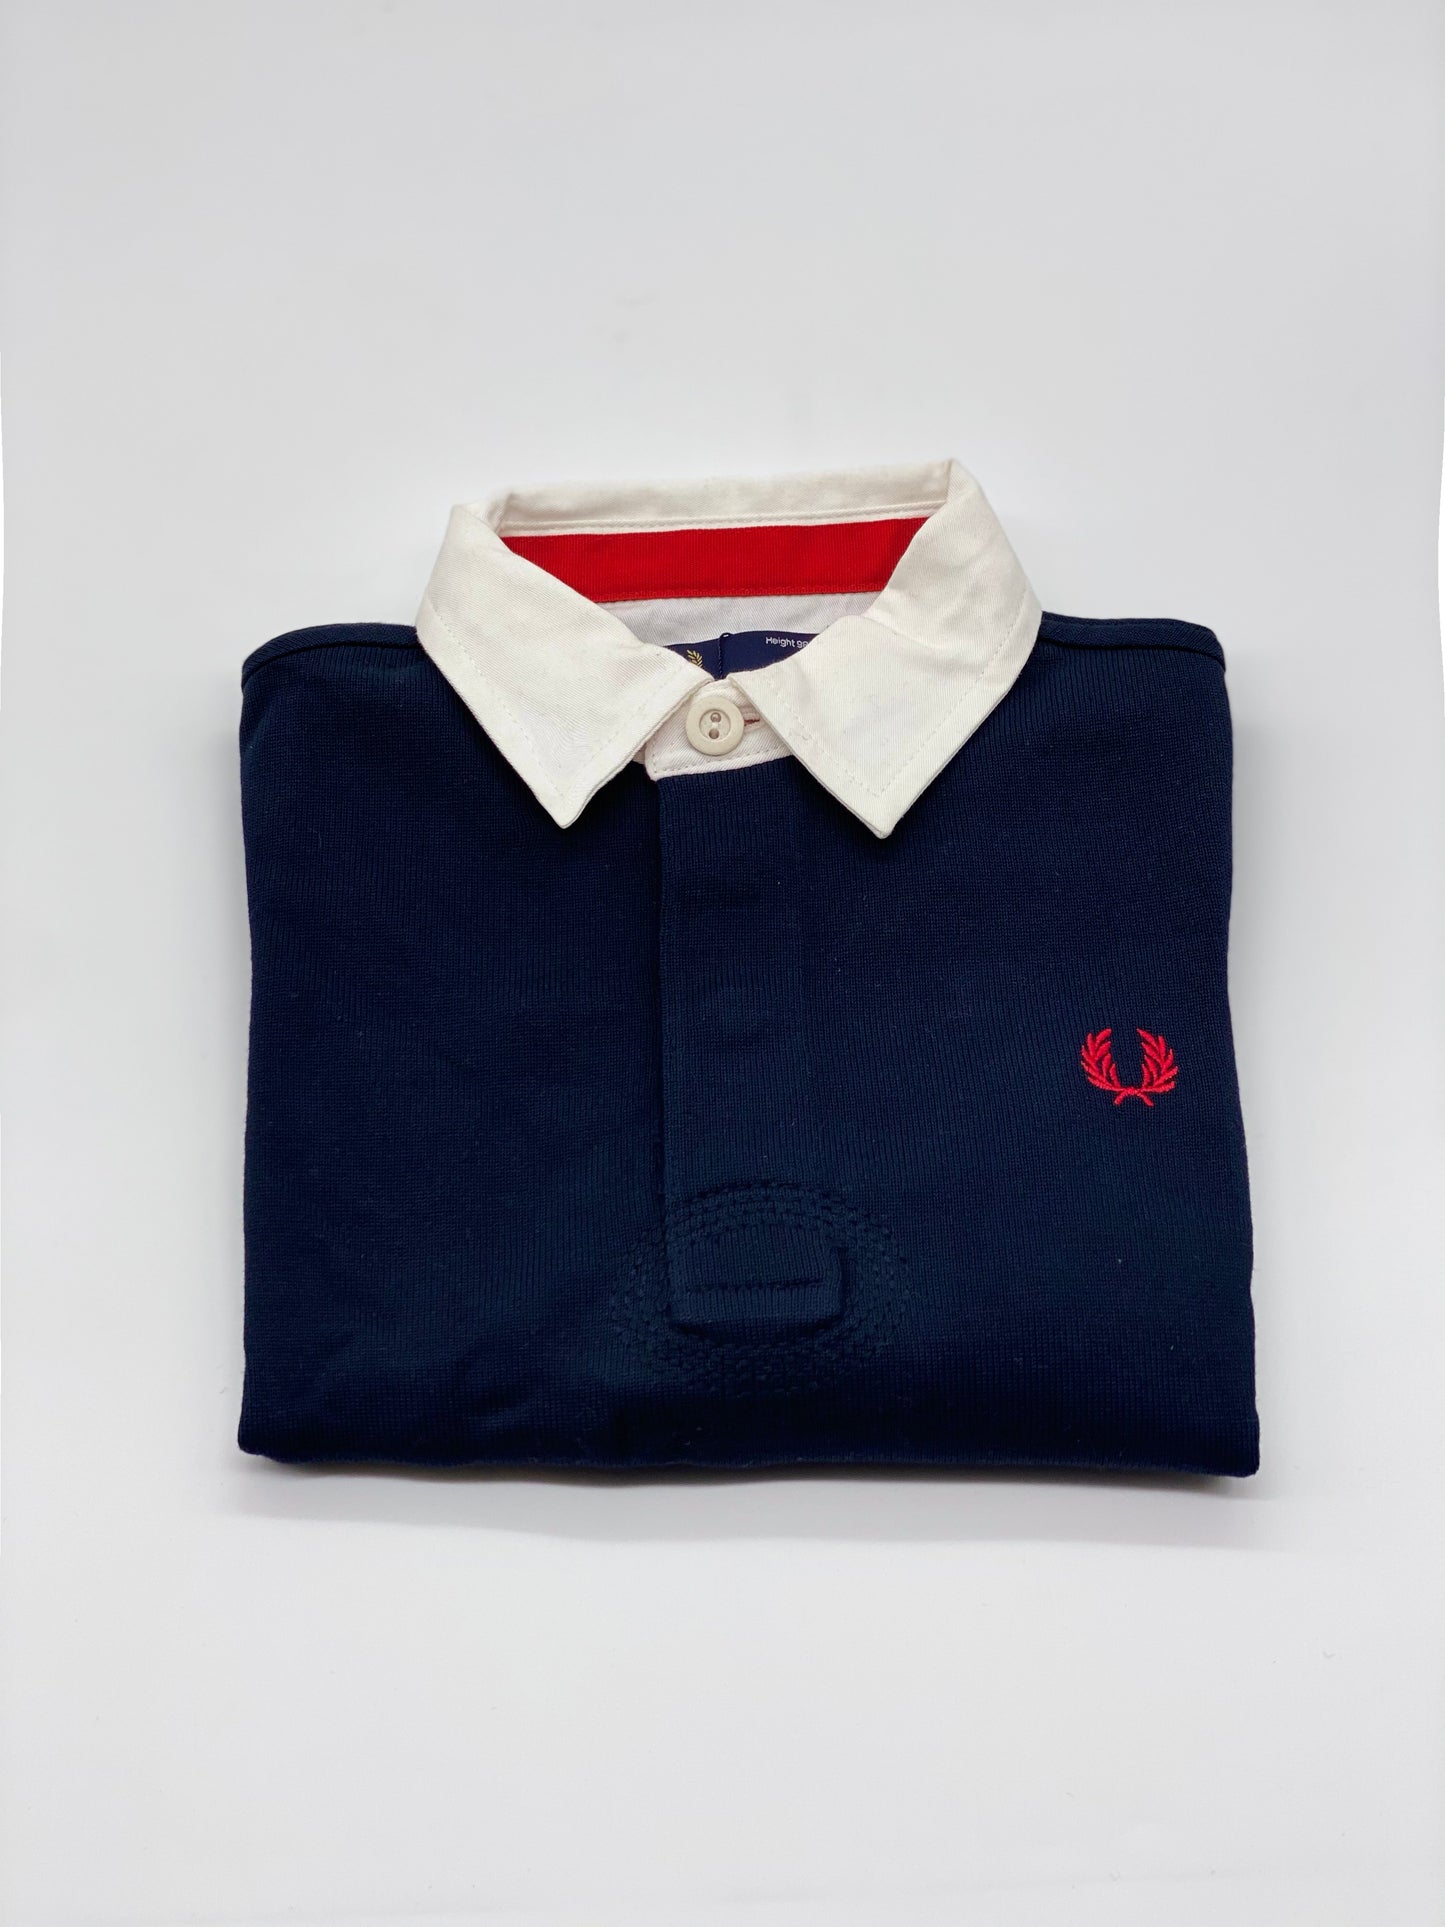 KIDS NAVY FRED PERRY RUGBY SHIRT